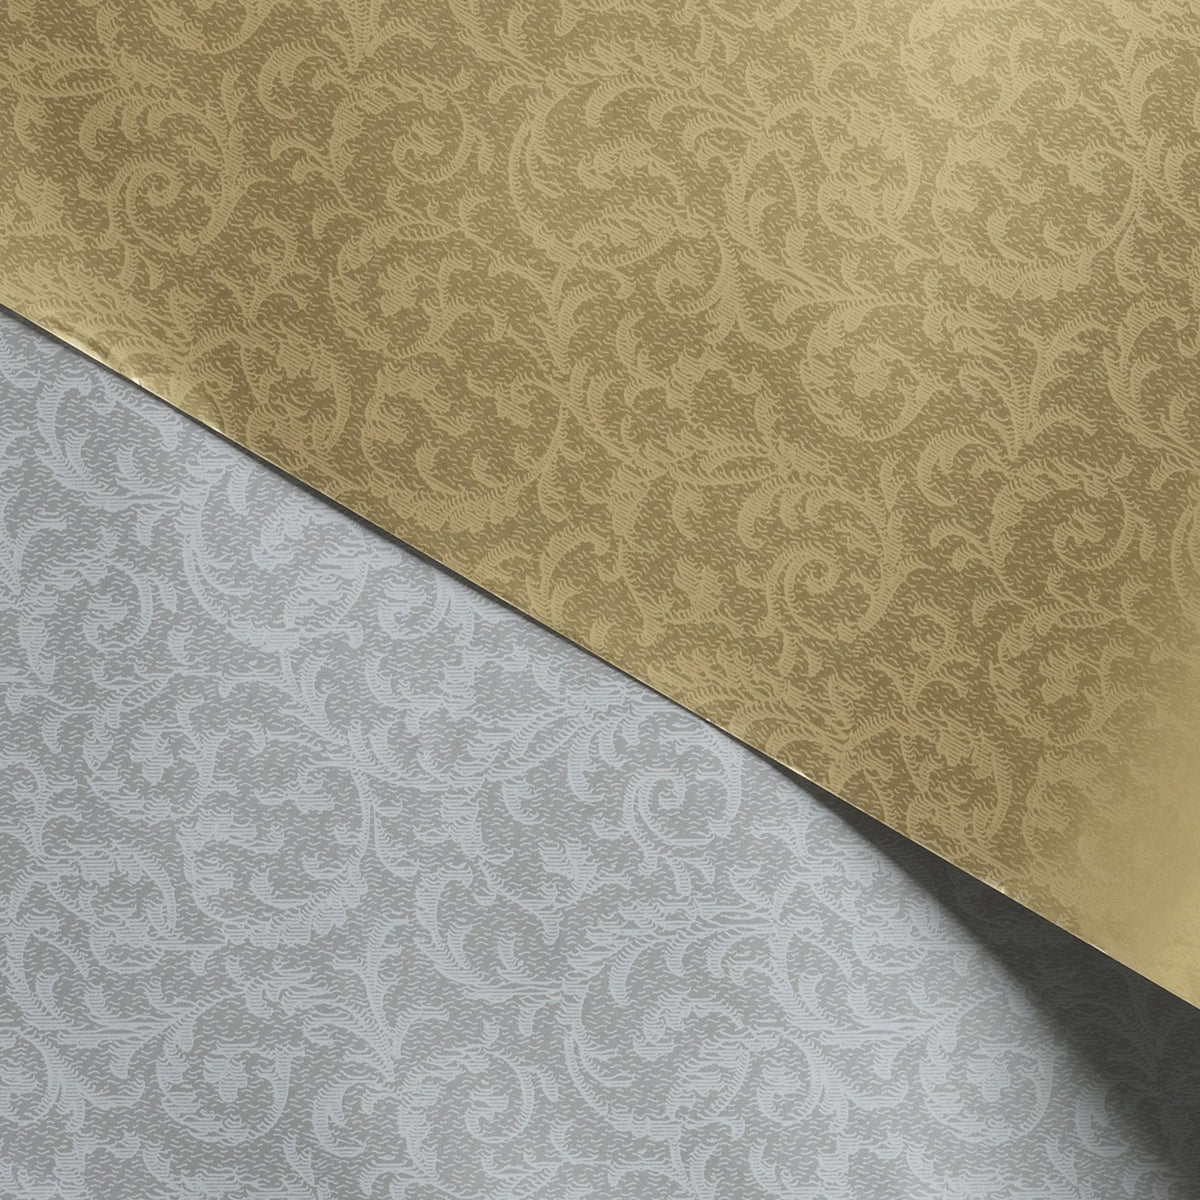 Gift Wrap Sheets - Gold Silver Leaf 7489 (Pack of 25 sheets)